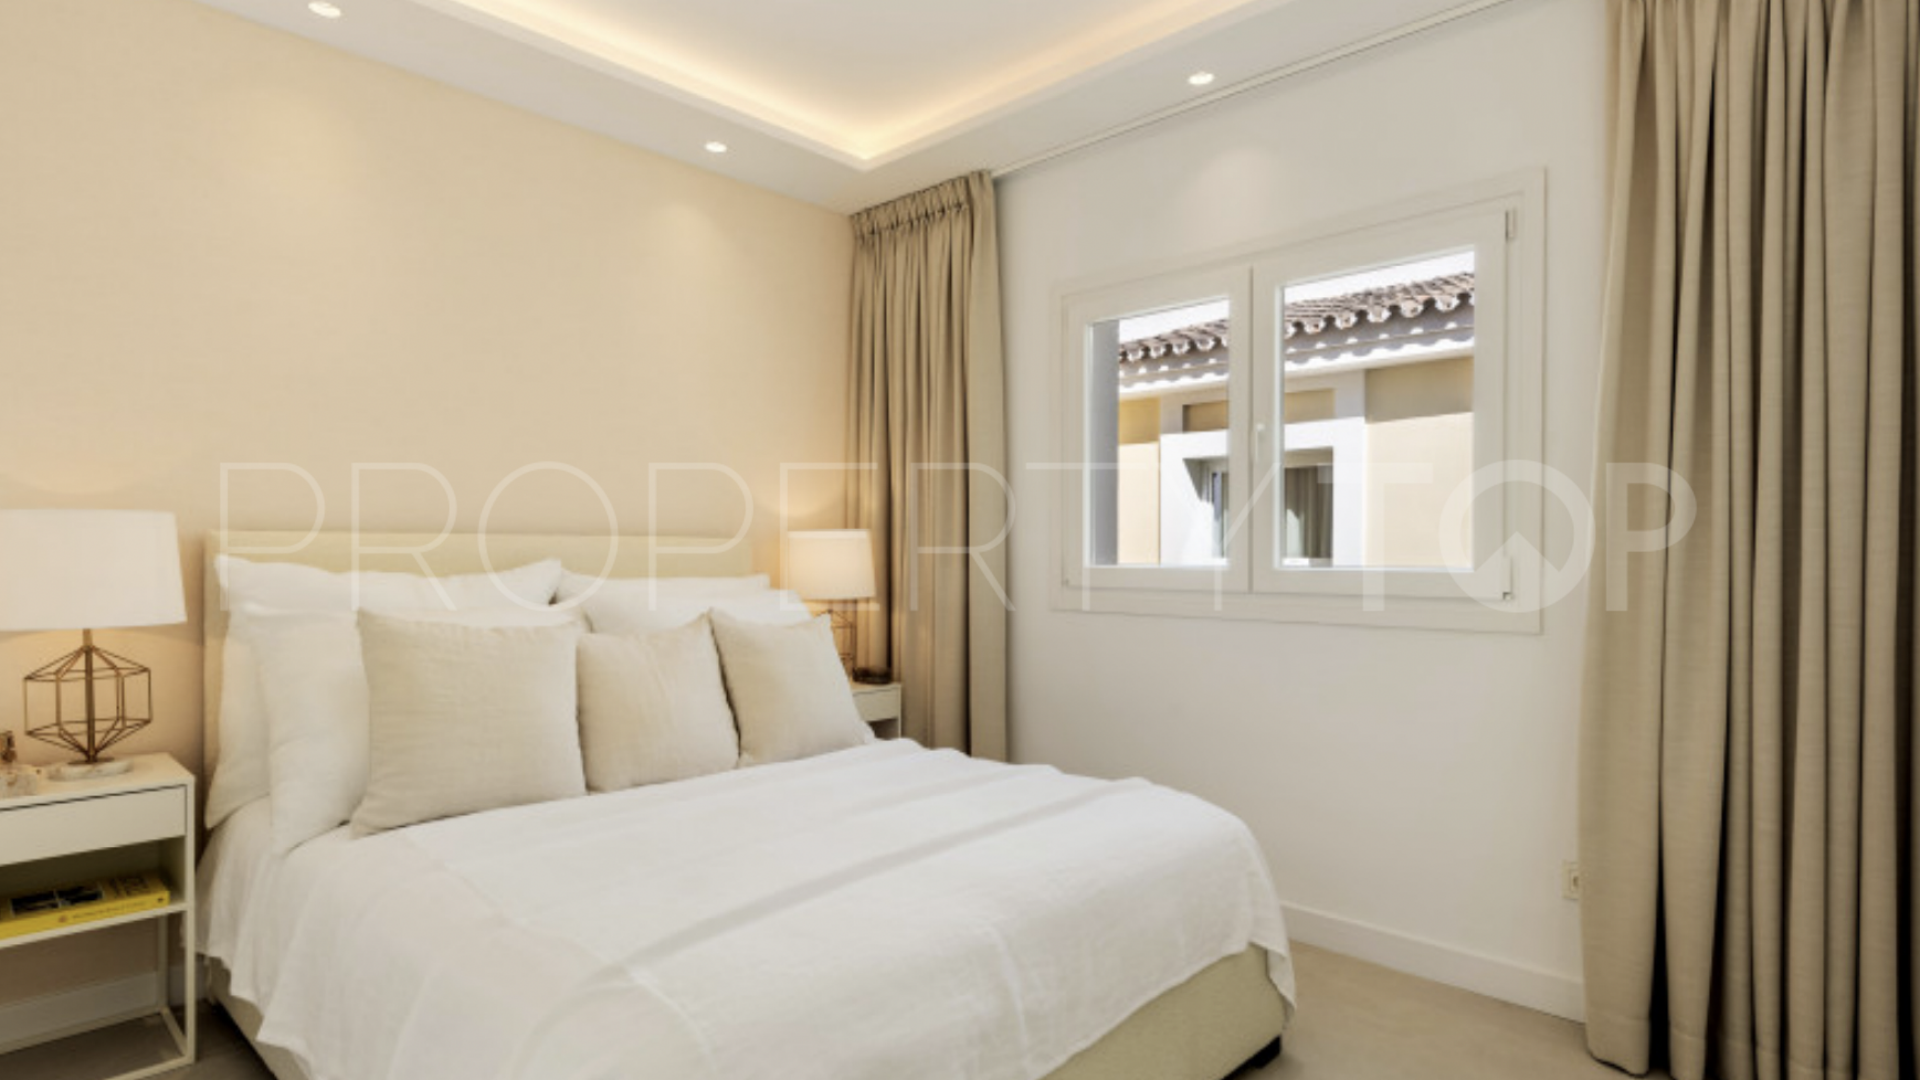 2 bedrooms duplex penthouse for sale in Aloha Gardens